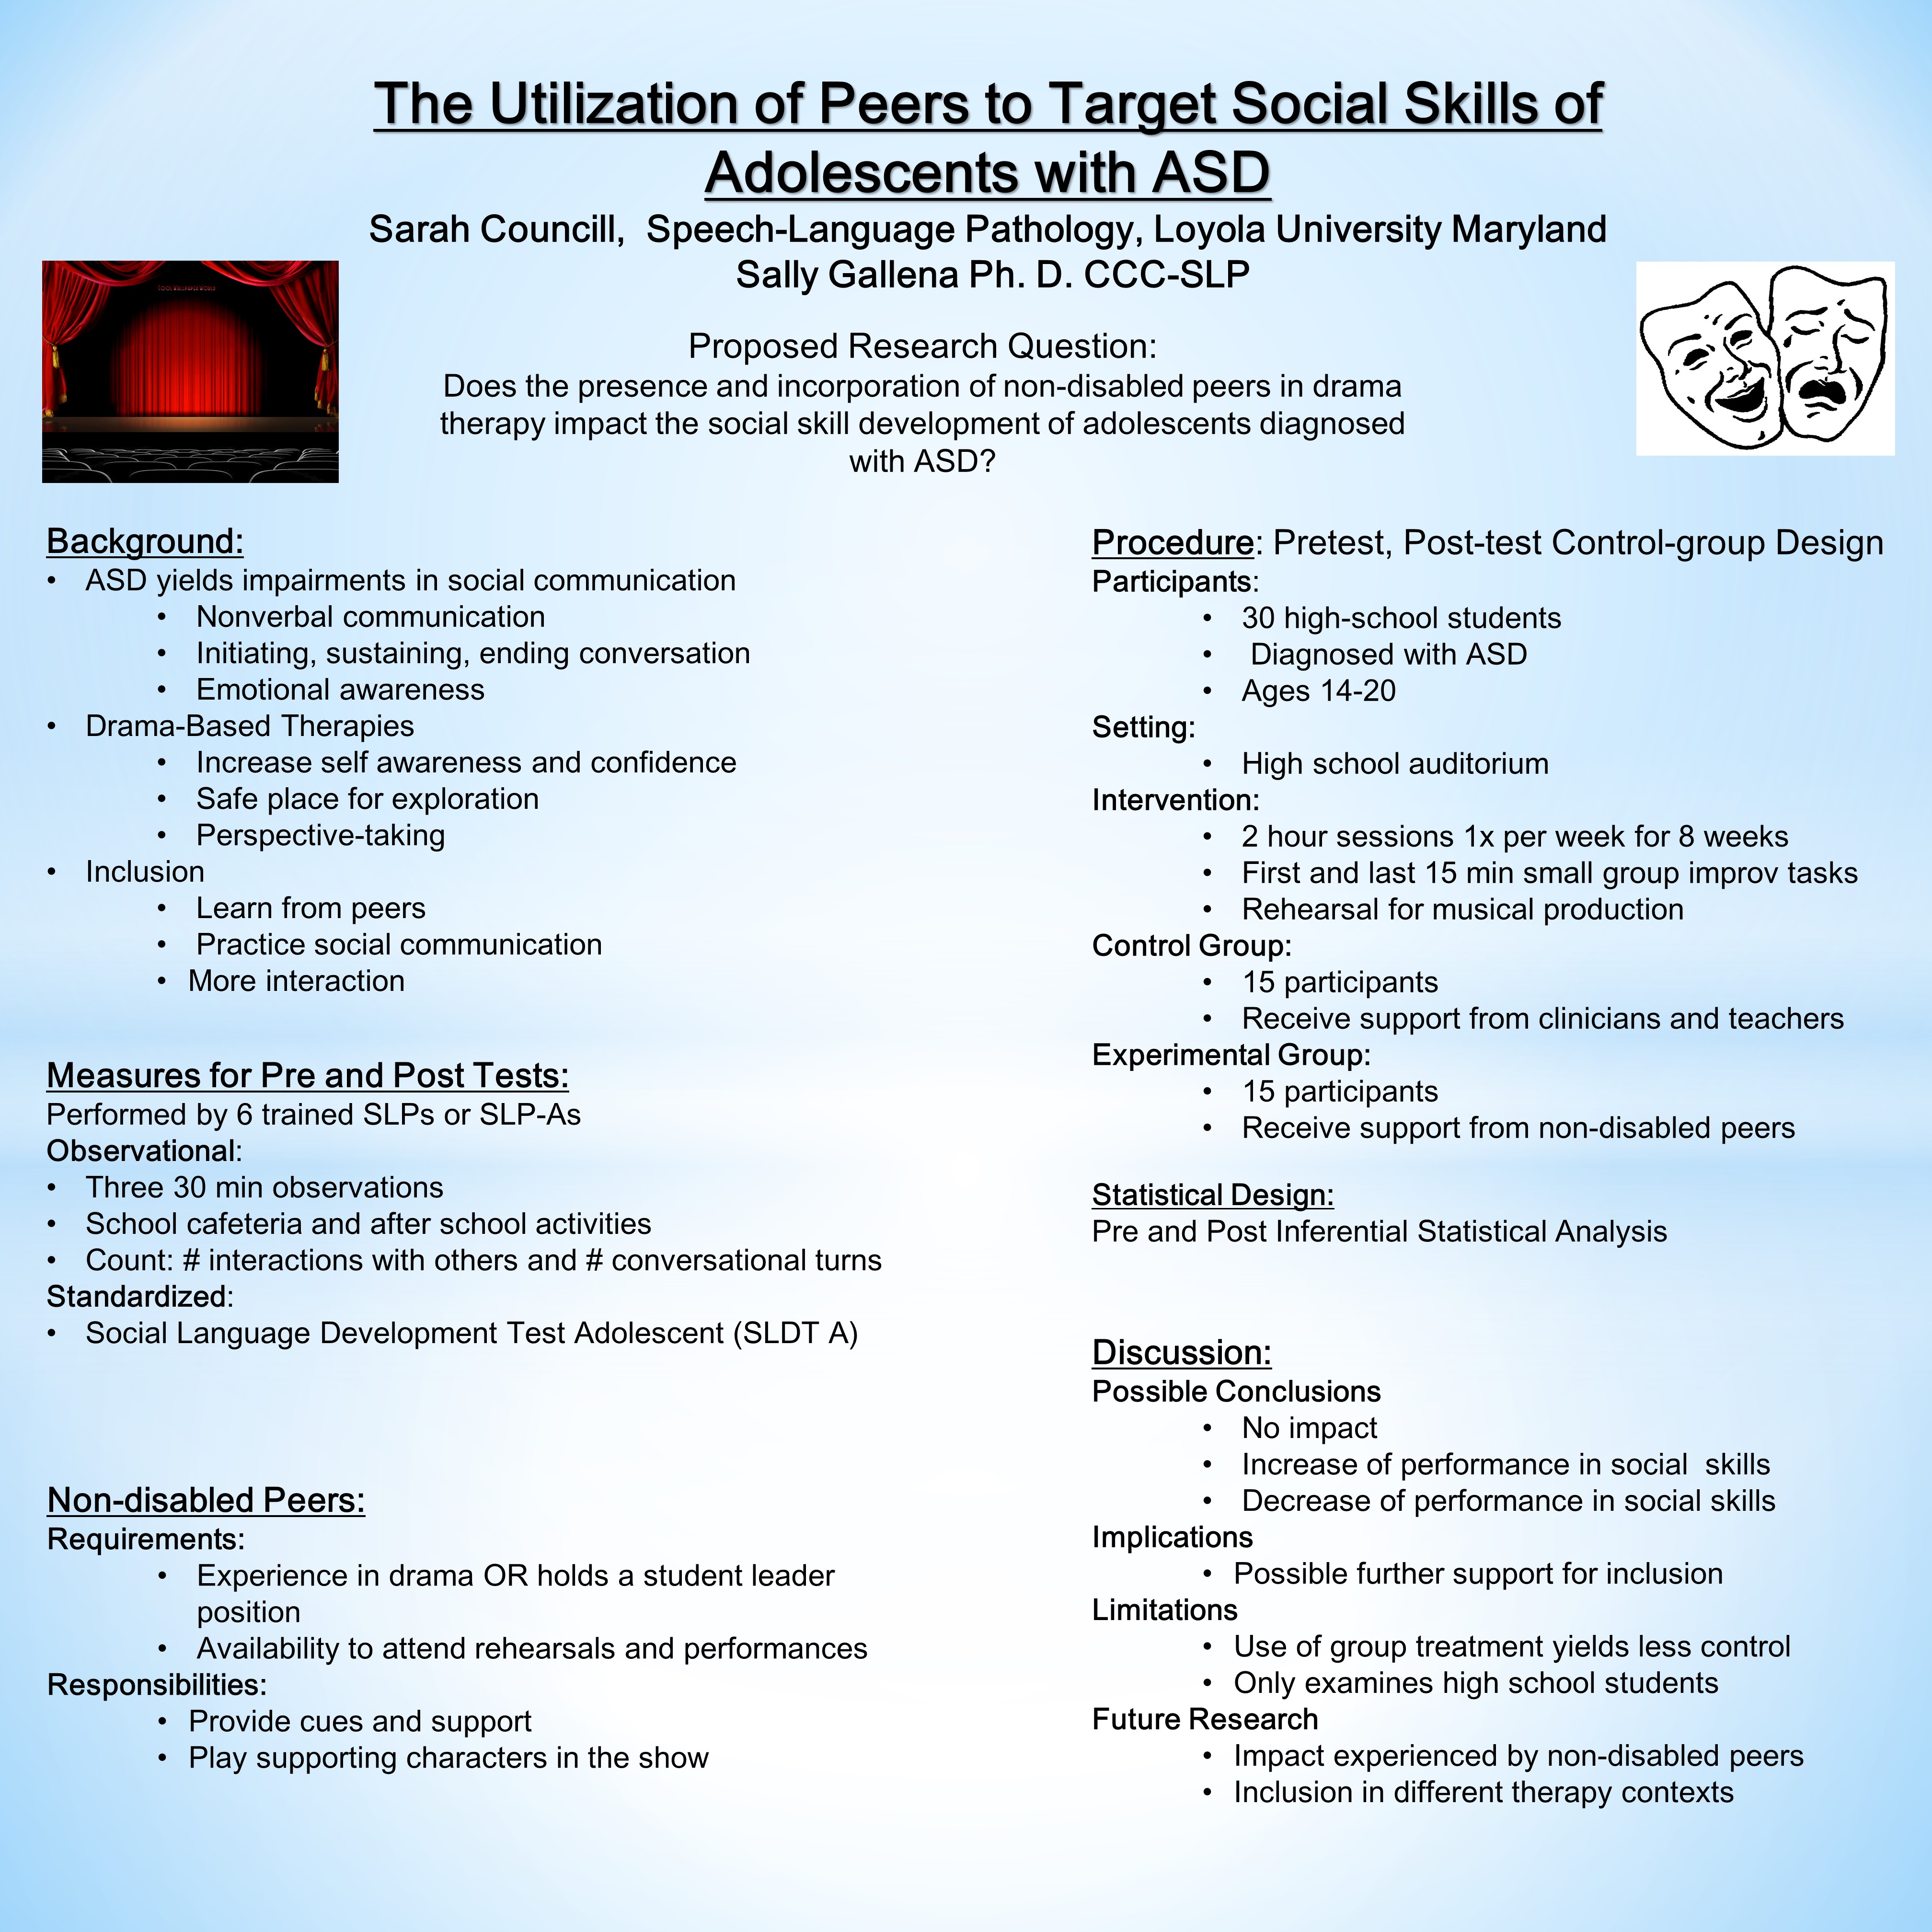 poster image: The Utilization of Peers to Target Social Skills of Adolescents with ASD